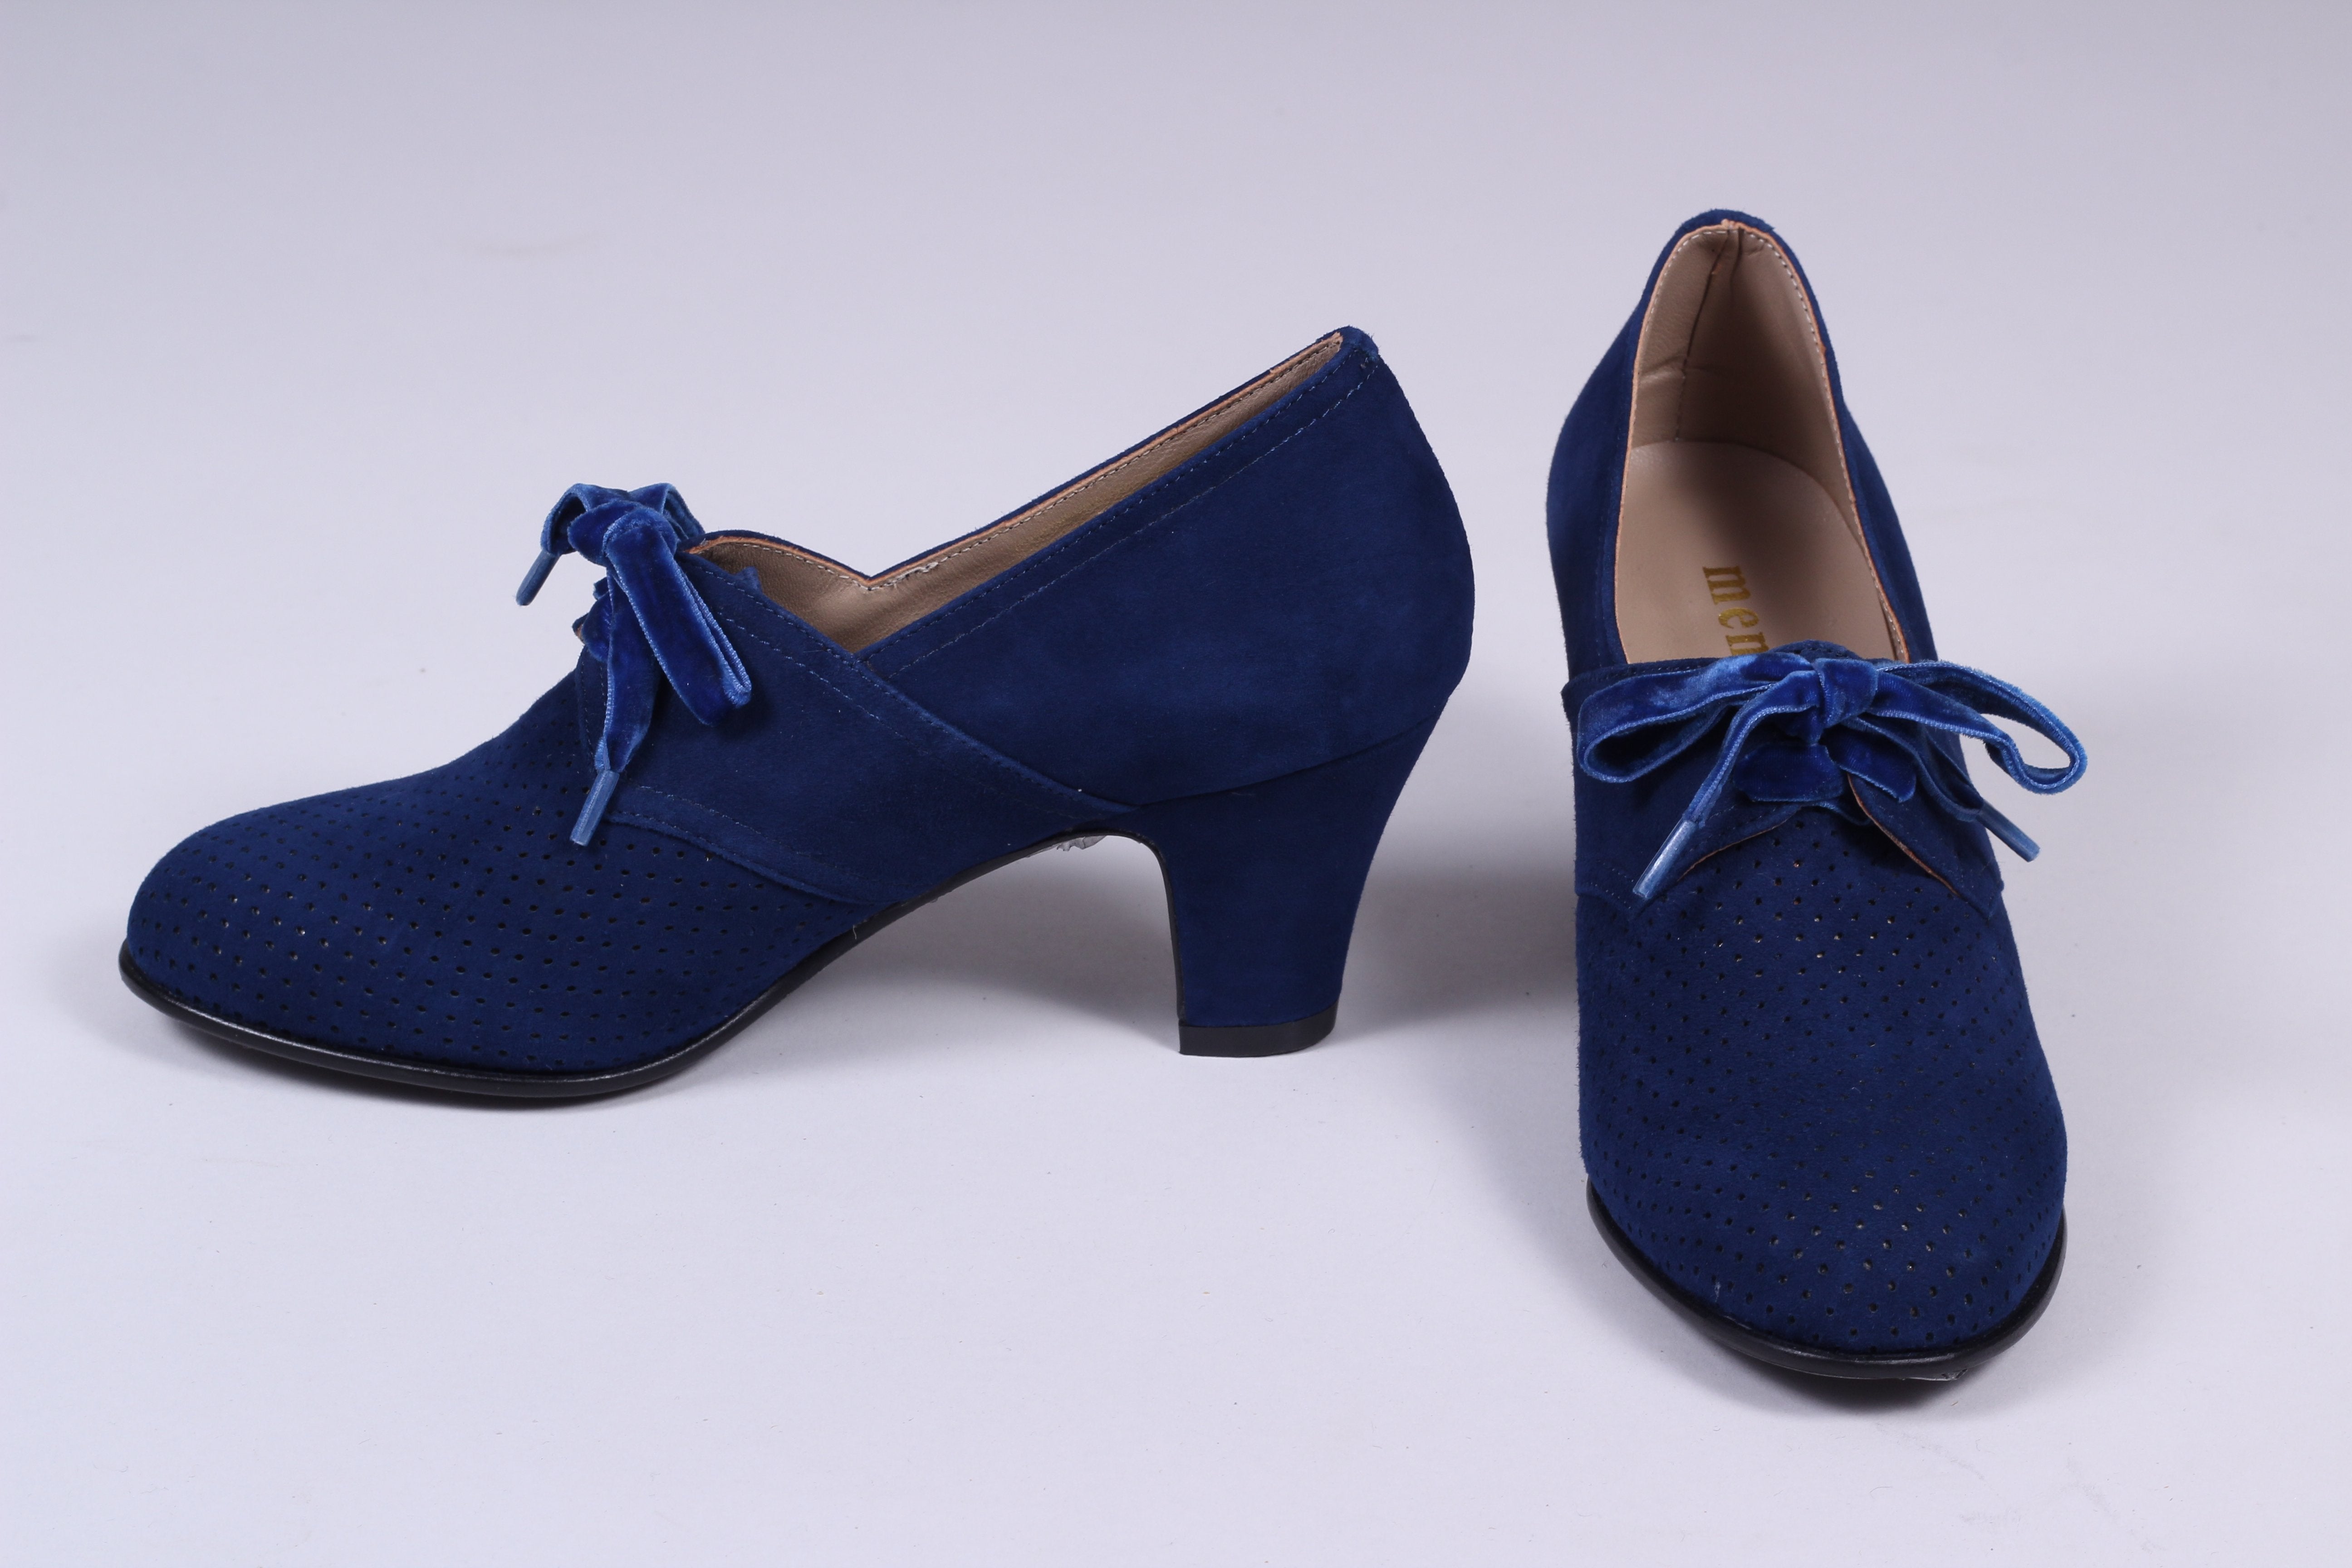 40's vintage style pumps in suede with lace - navy blue - Esther